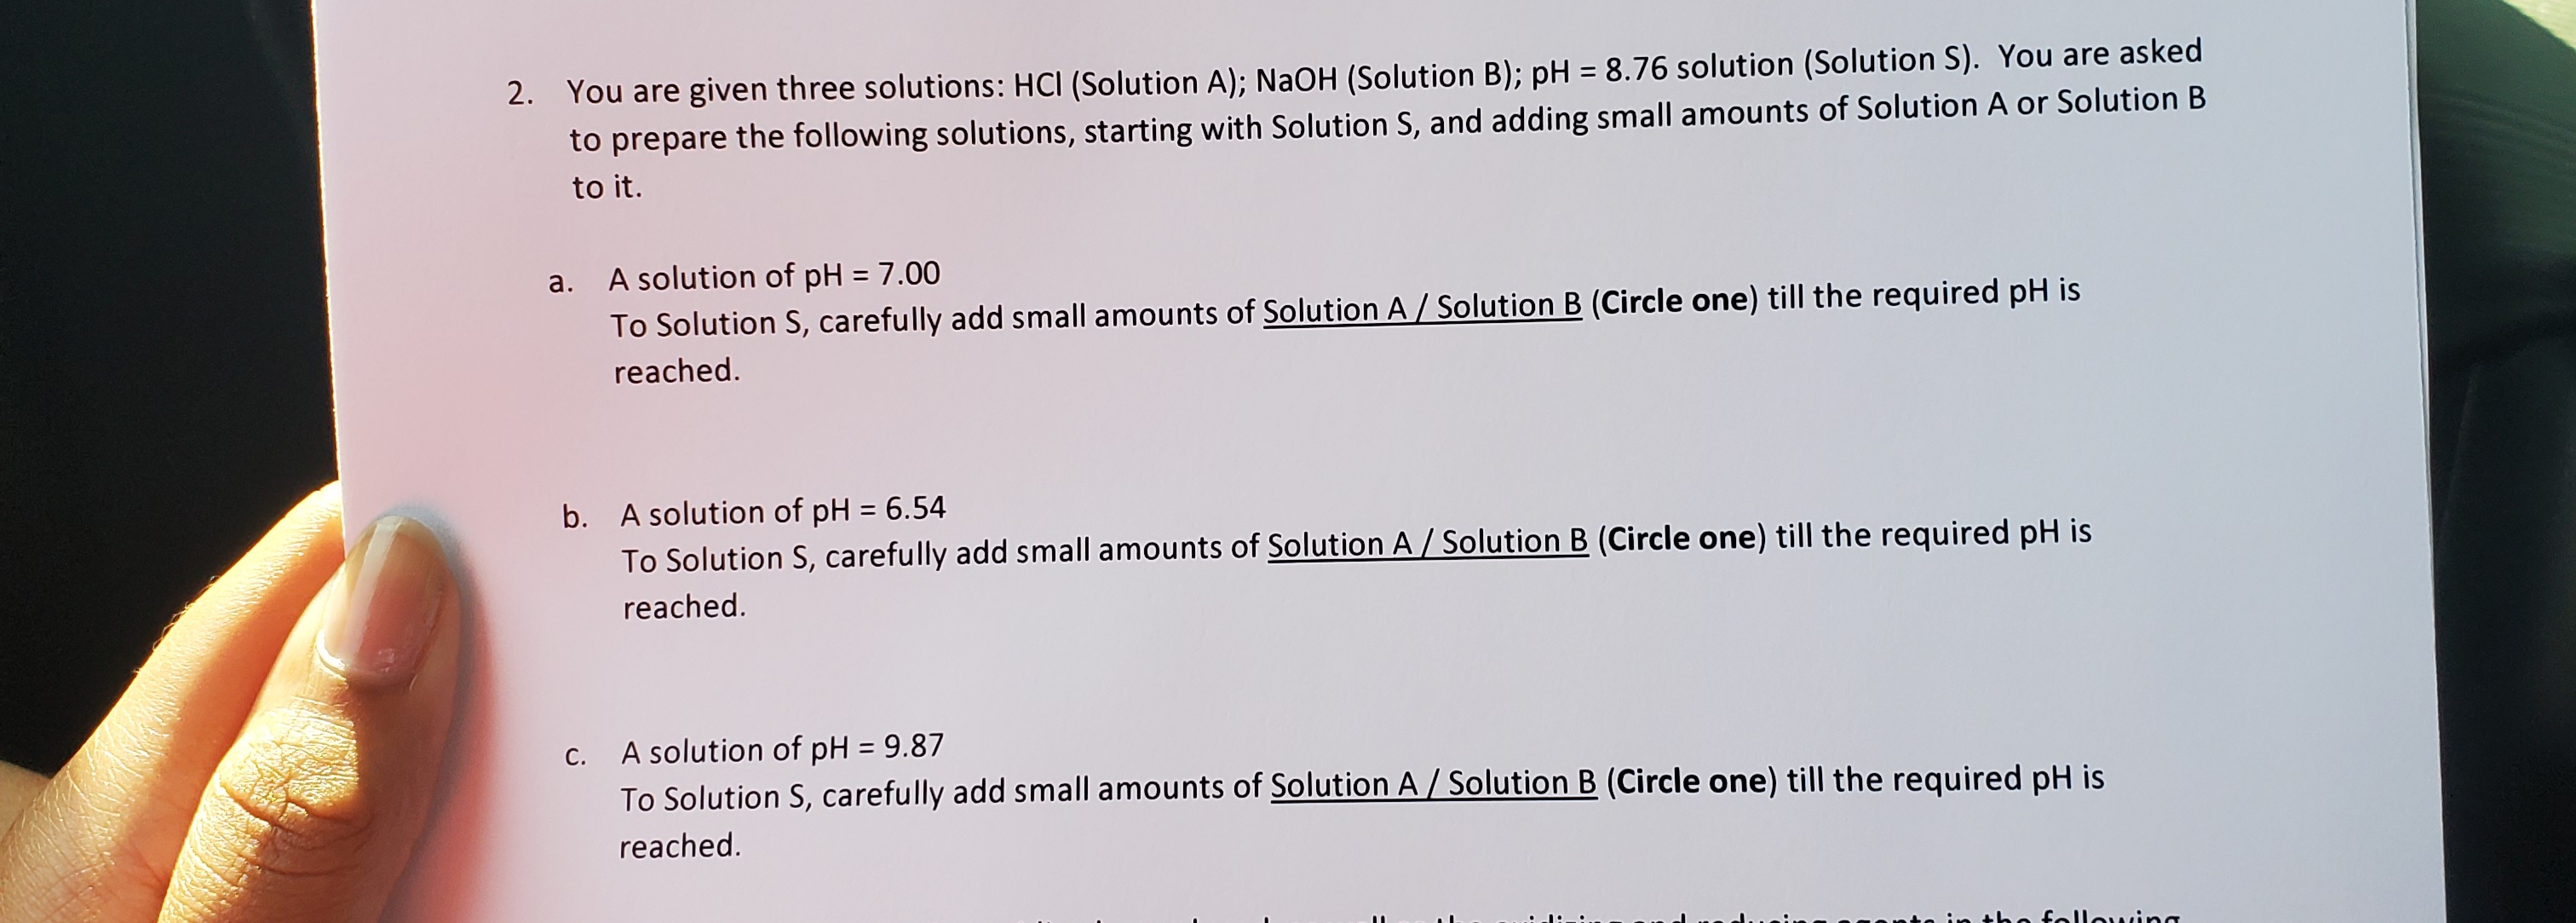 2. You are given three solutions: HCI (Solution A); NaOH (Solution B); pH = 8.76 solution (Solution S). You are asked
to prepare the following solutions, starting with Solution S, and adding small amounts of Solution A or Solution B
%3D
to it.
a. A solution of pH = 7.00
To Solution S, carefully add small amounts of Solution A/ Solution B (Circle one) till the required pH is
reached.
b. A solution of pH = 6.54
To Solution S, carefully add small amounts of Solution A / Solution B (Circle one) till the required pH is
%3D
reached.
A solution of pH = 9.87
To Solution S, carefully add small amounts of Solution A / Solution B (Circle one) till the required pH is
С.
%3D
reached.
